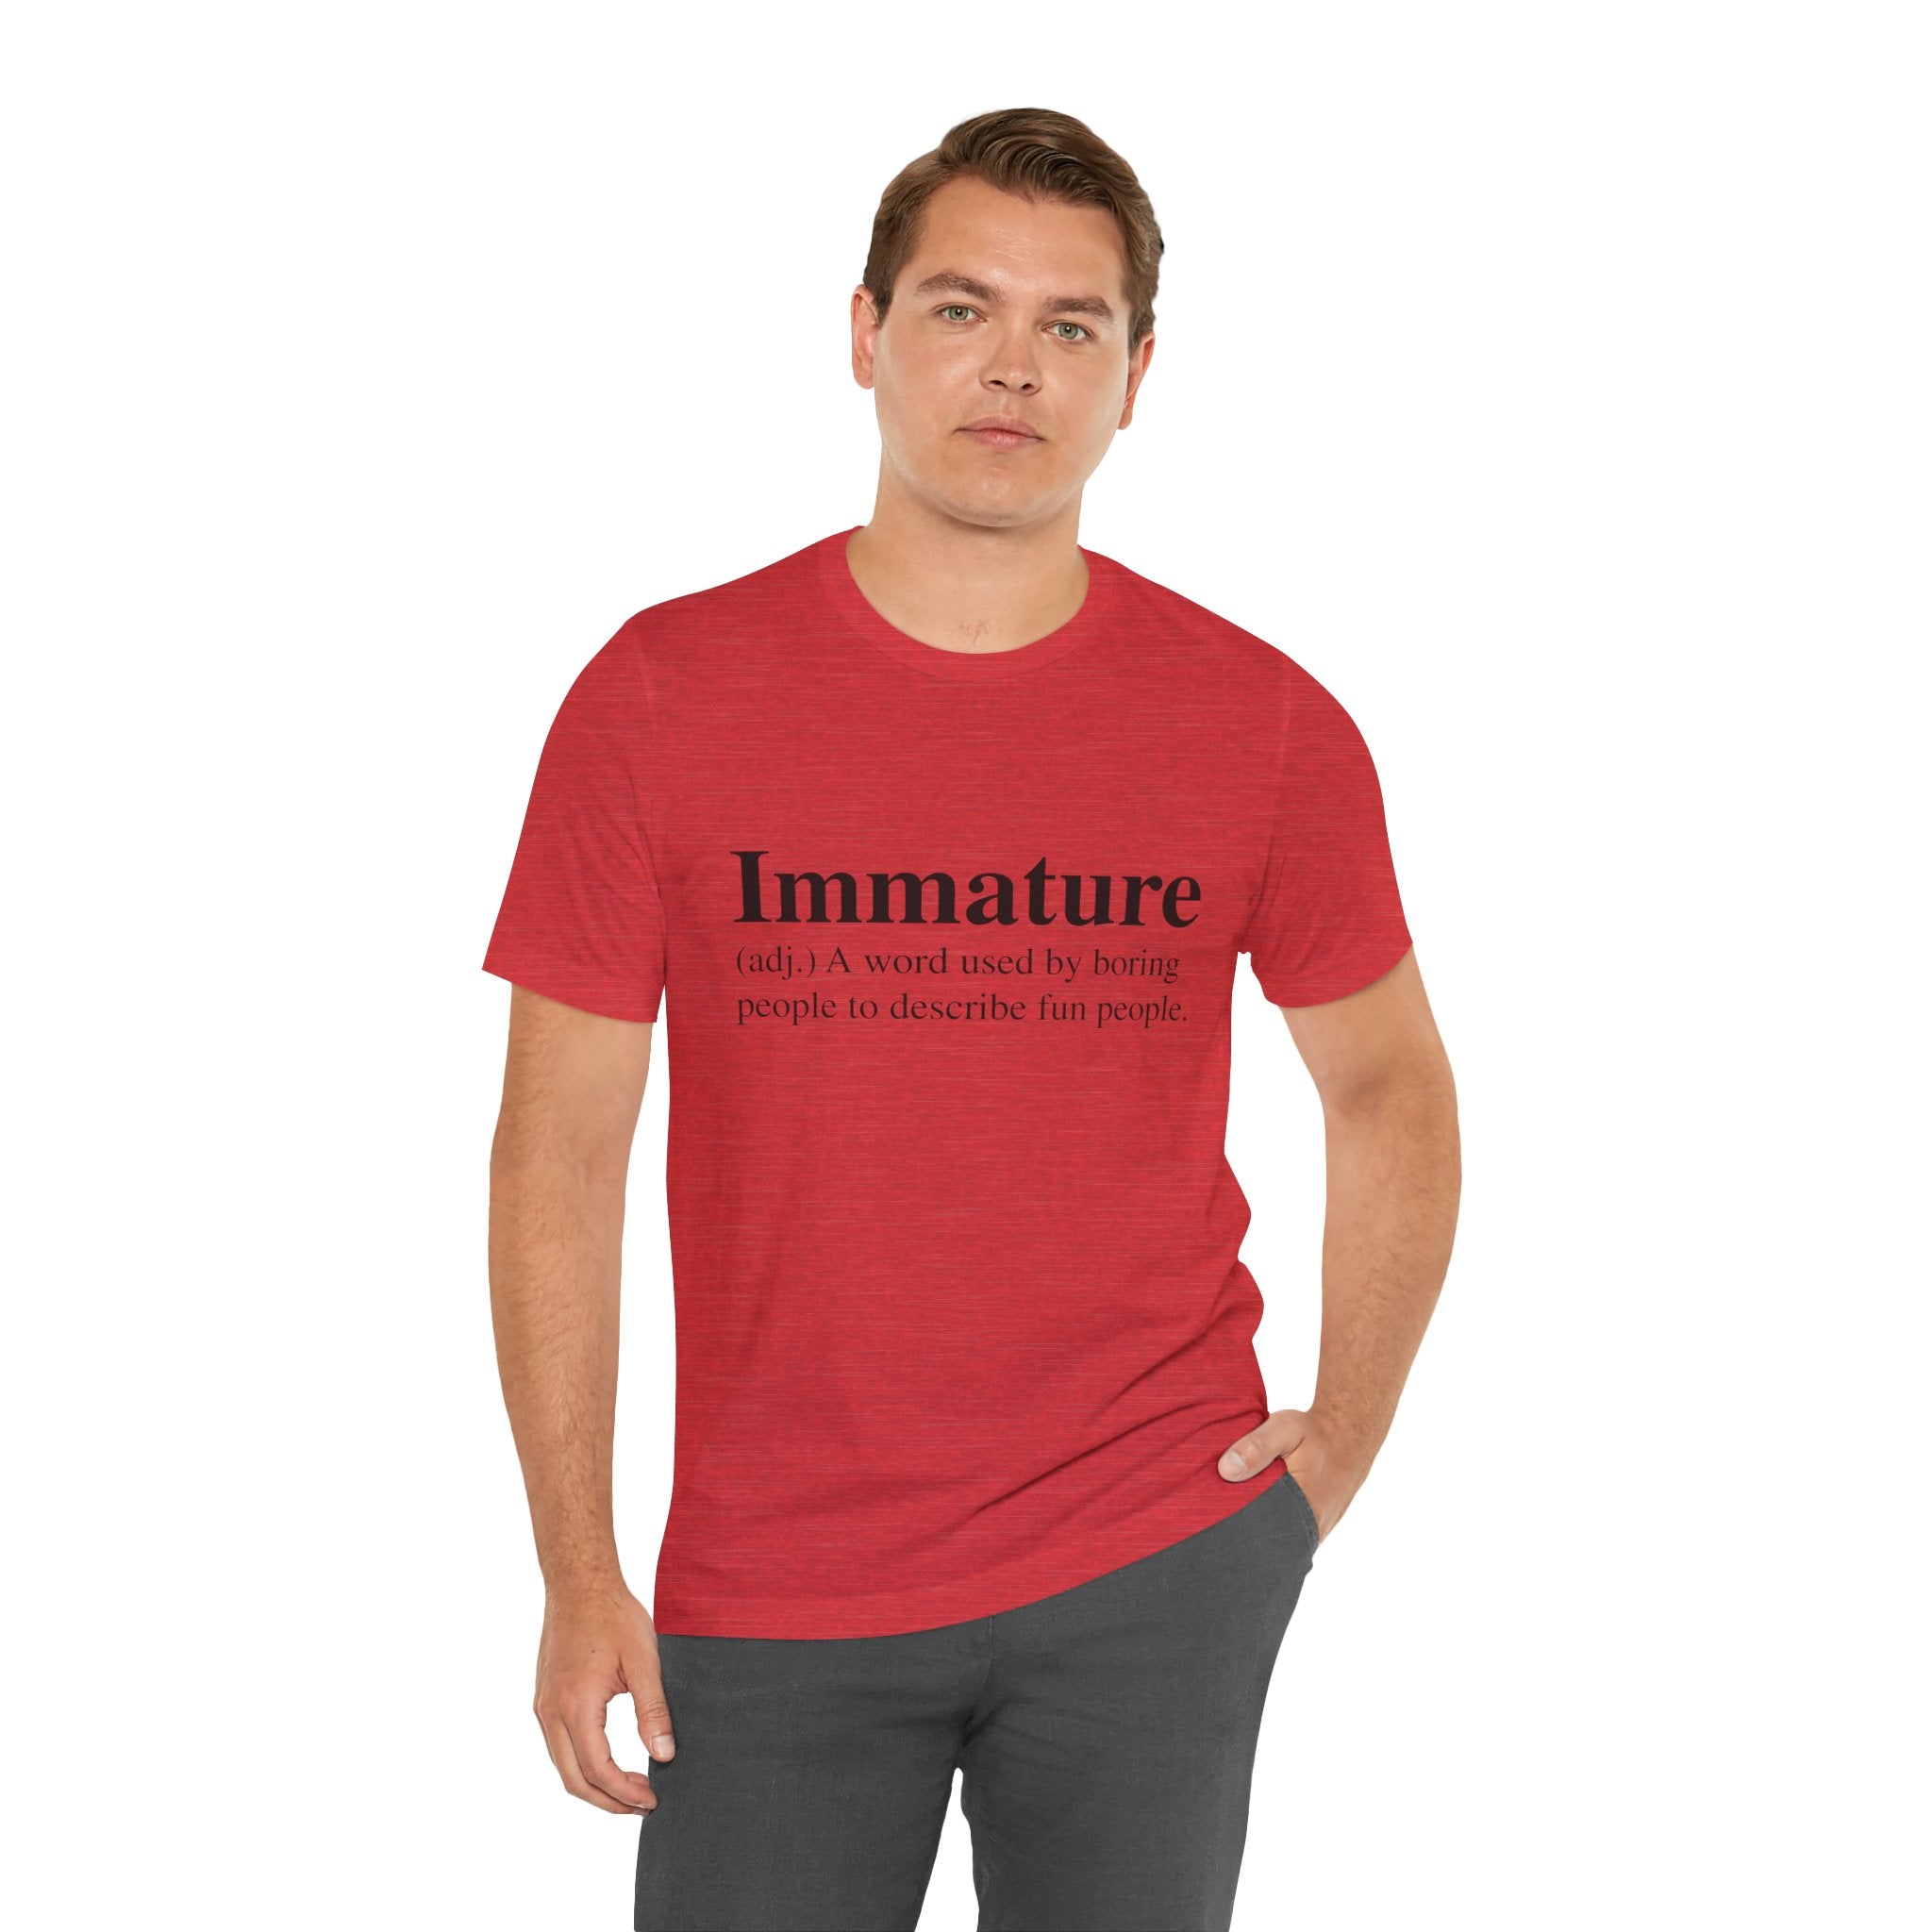 Man standing wearing a red unisex Immature T-Shirt tee with the text "Immature T-Shirt: a word used by boring people to describe fun people" printed on it.